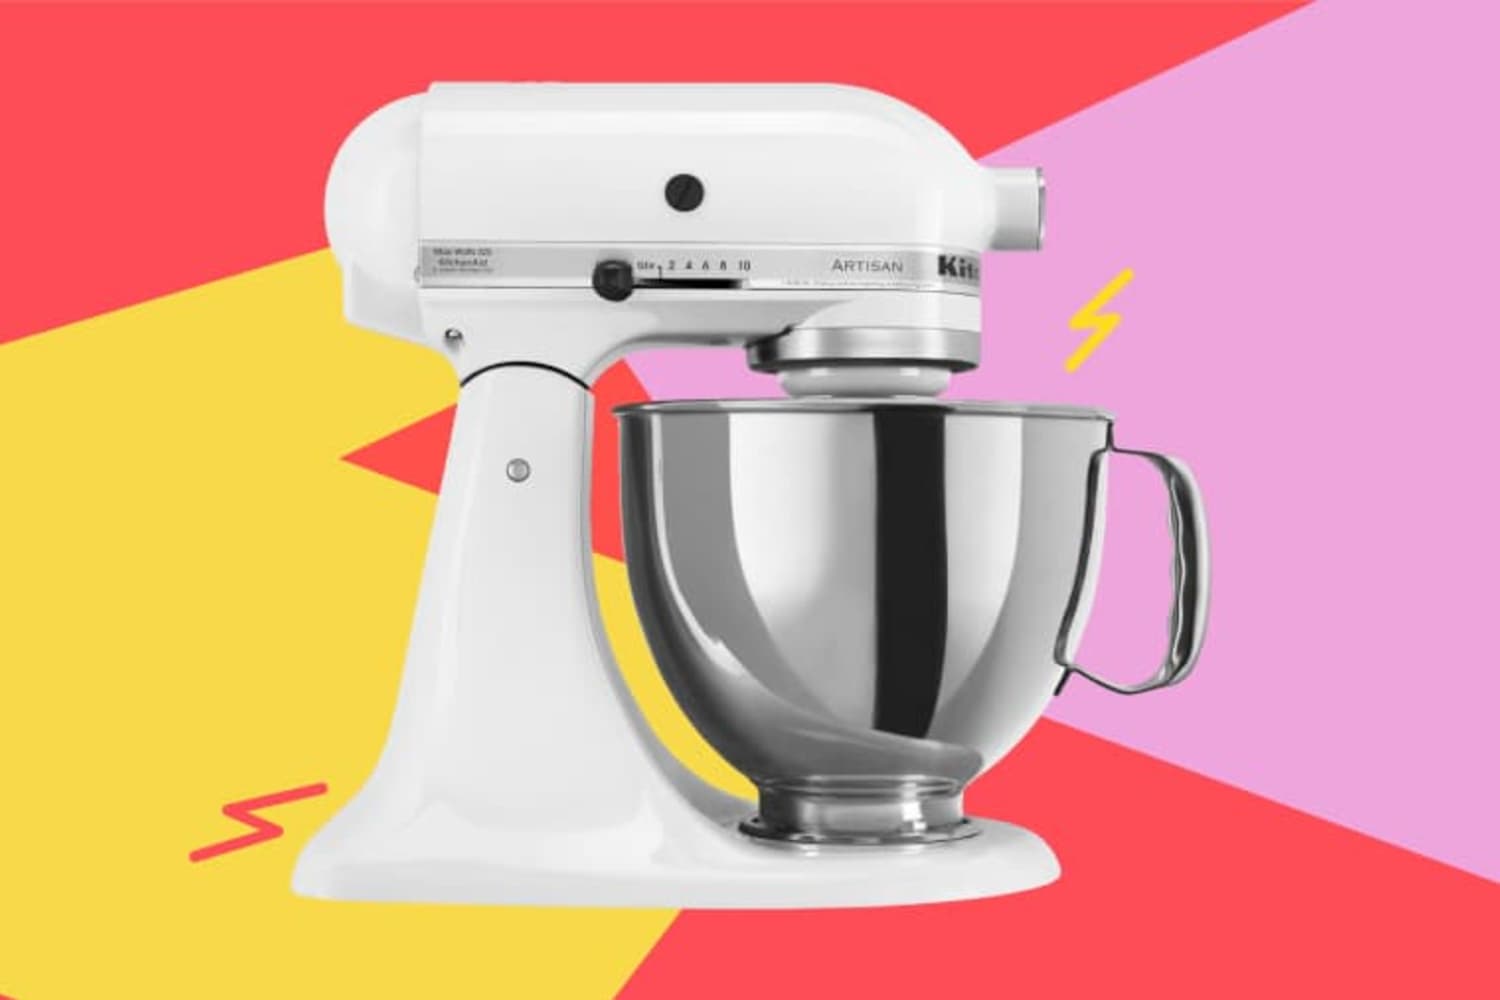 Walmart has KitchenAid stand mixers on sale for as low as $189.99